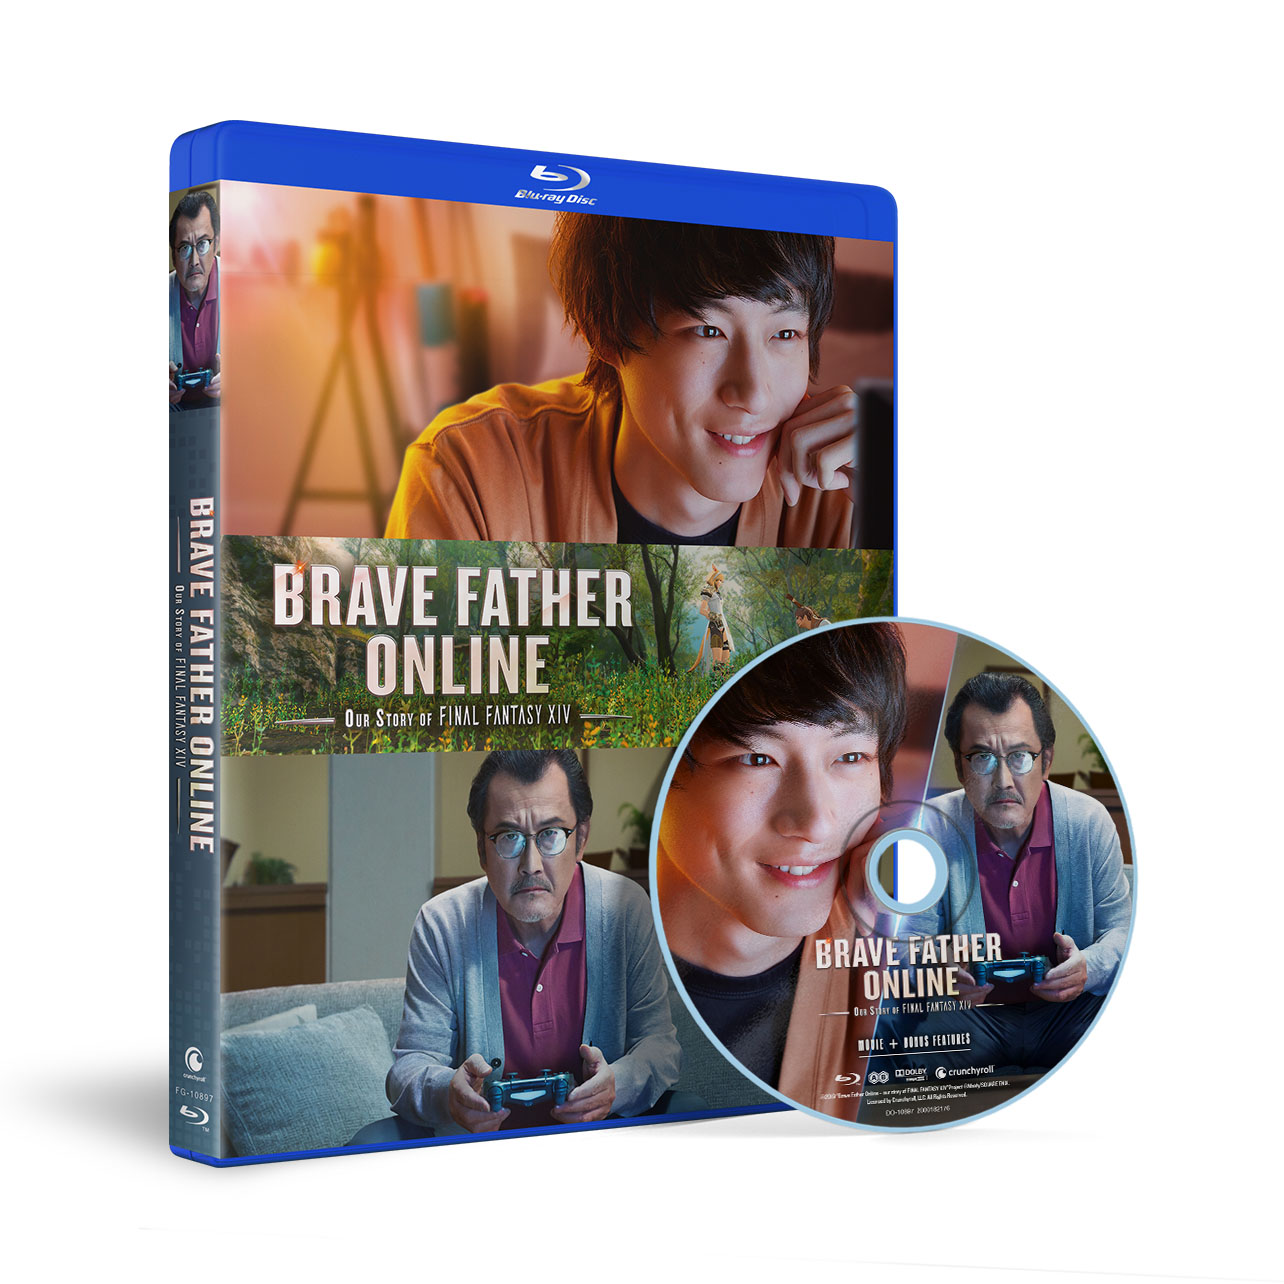 Brave Father Online: Our Story of Final Fantasy XIV - SUB ONLY - Blu-ray image count 0